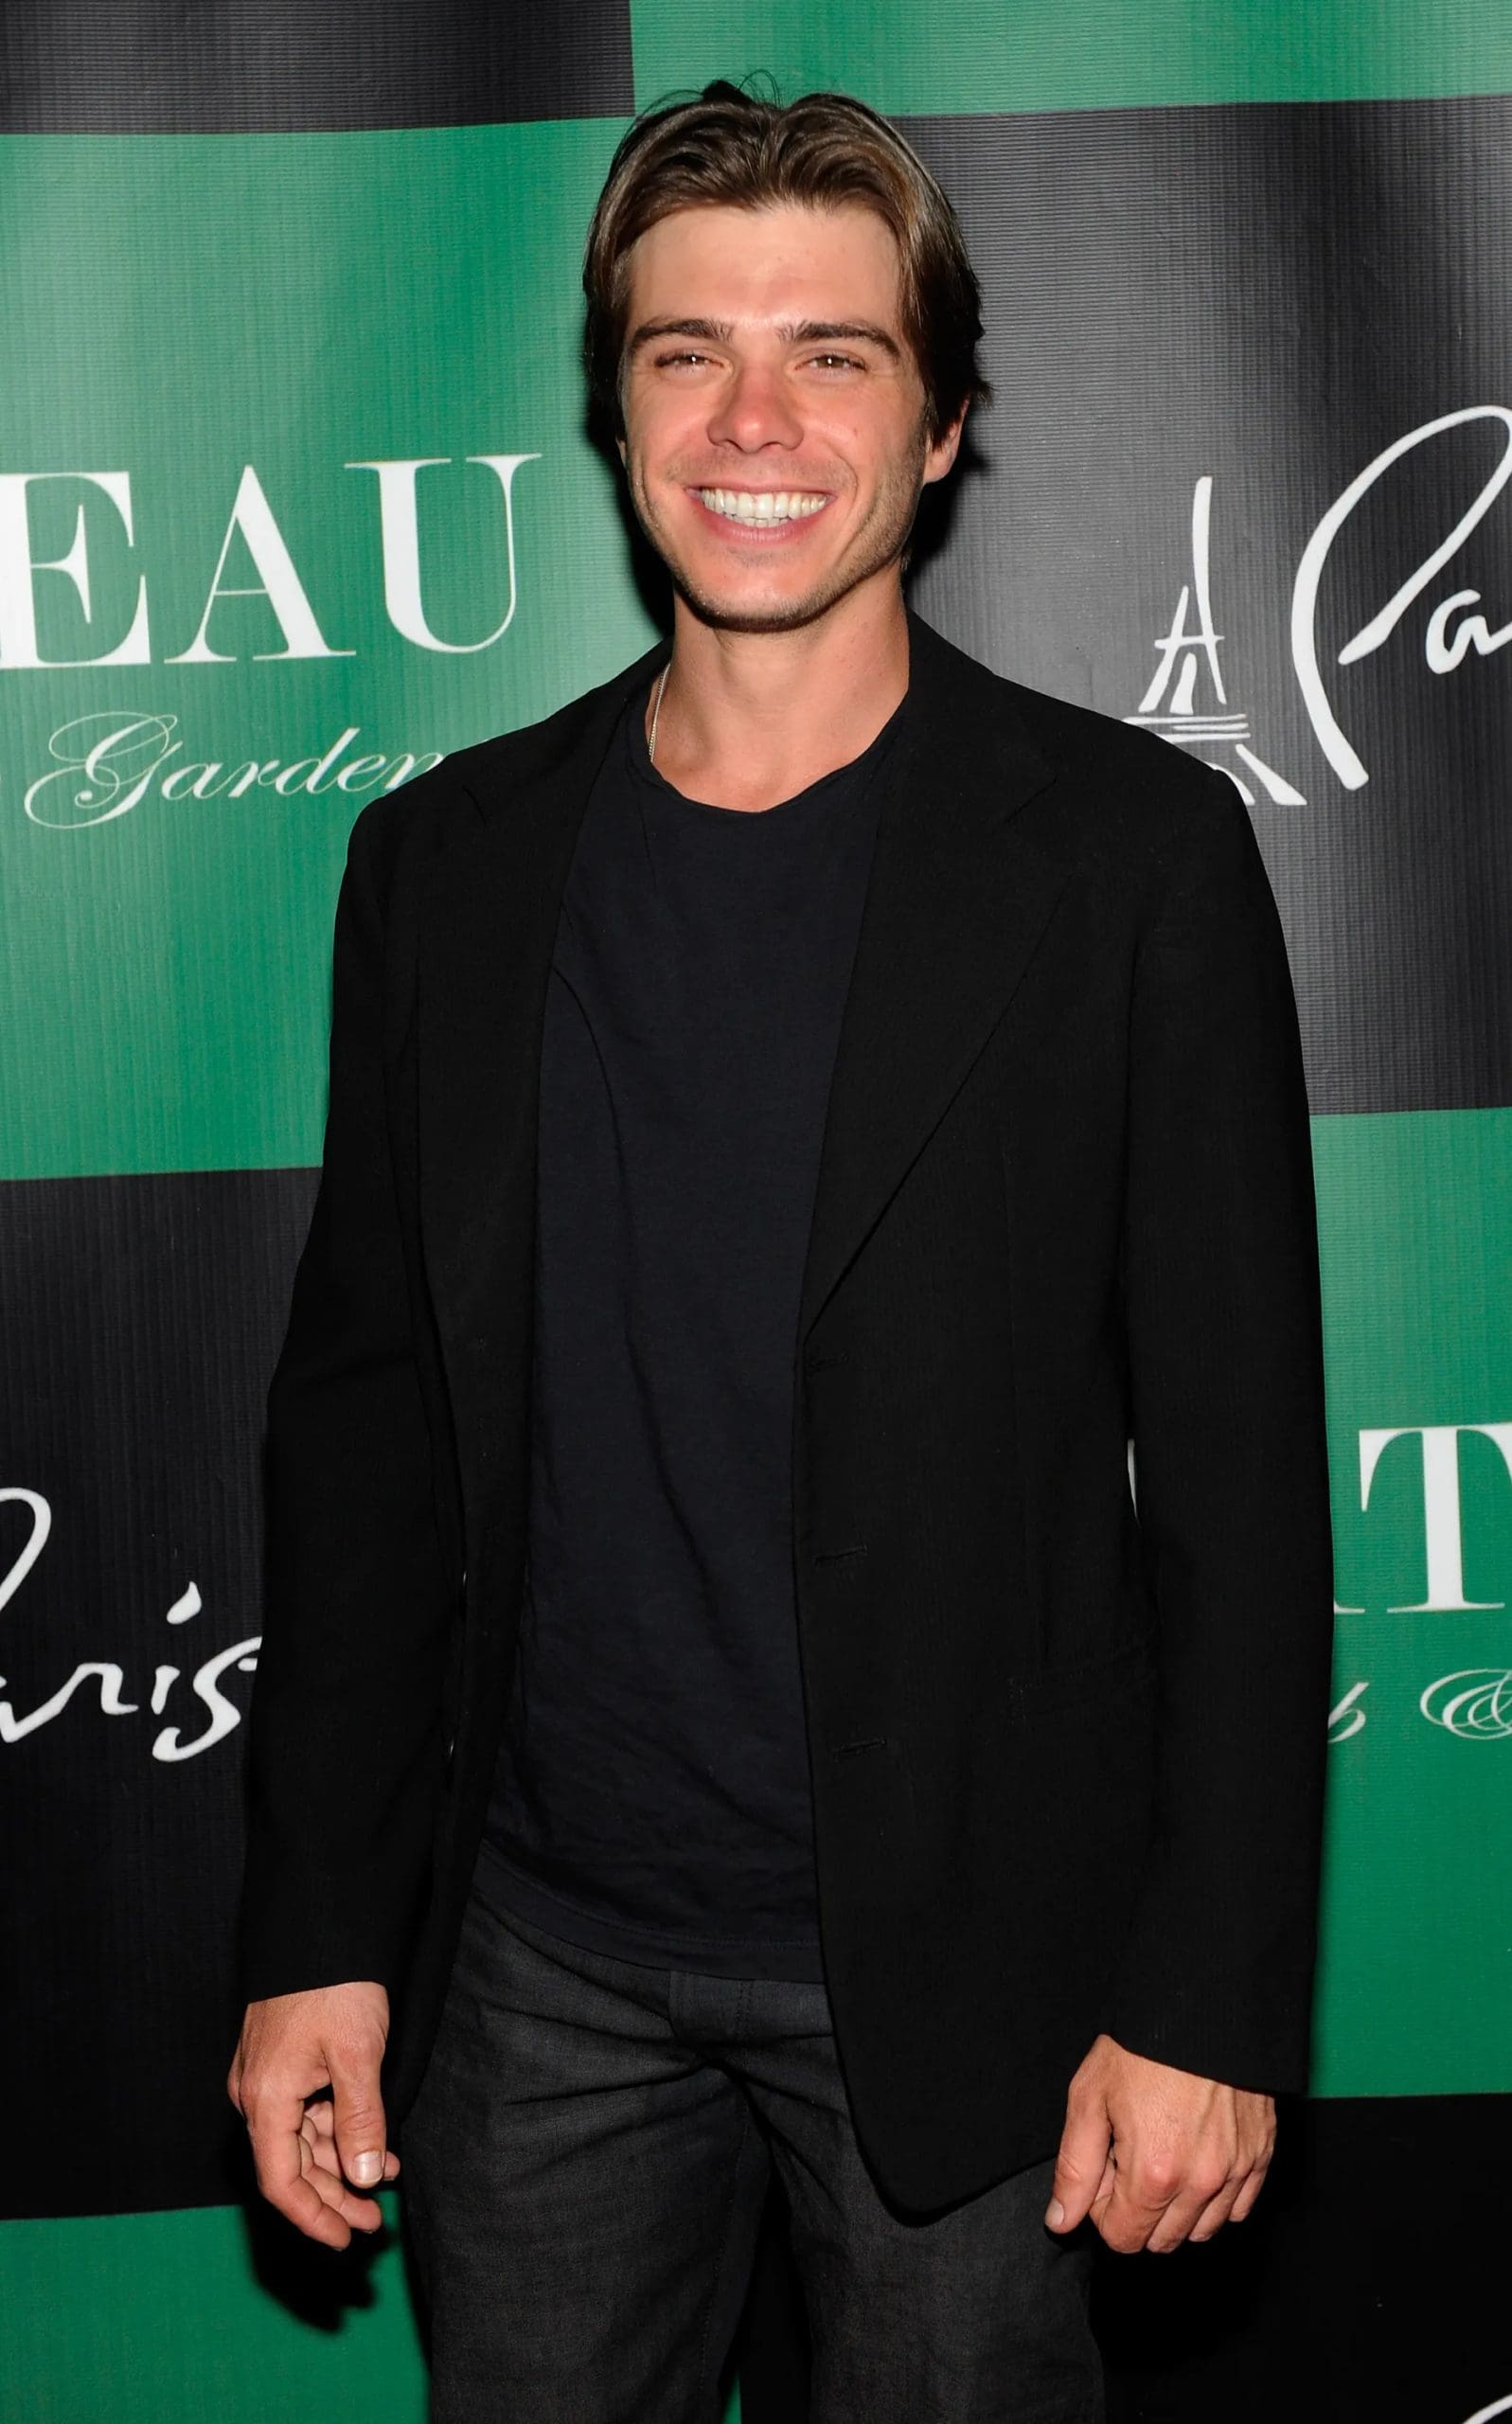 Matthew Lawrrence arrives at the Chateau Nightclub & Gardens at the Paris Las Vegas on April 28, 2012 in Las Vegas, Nevada.  